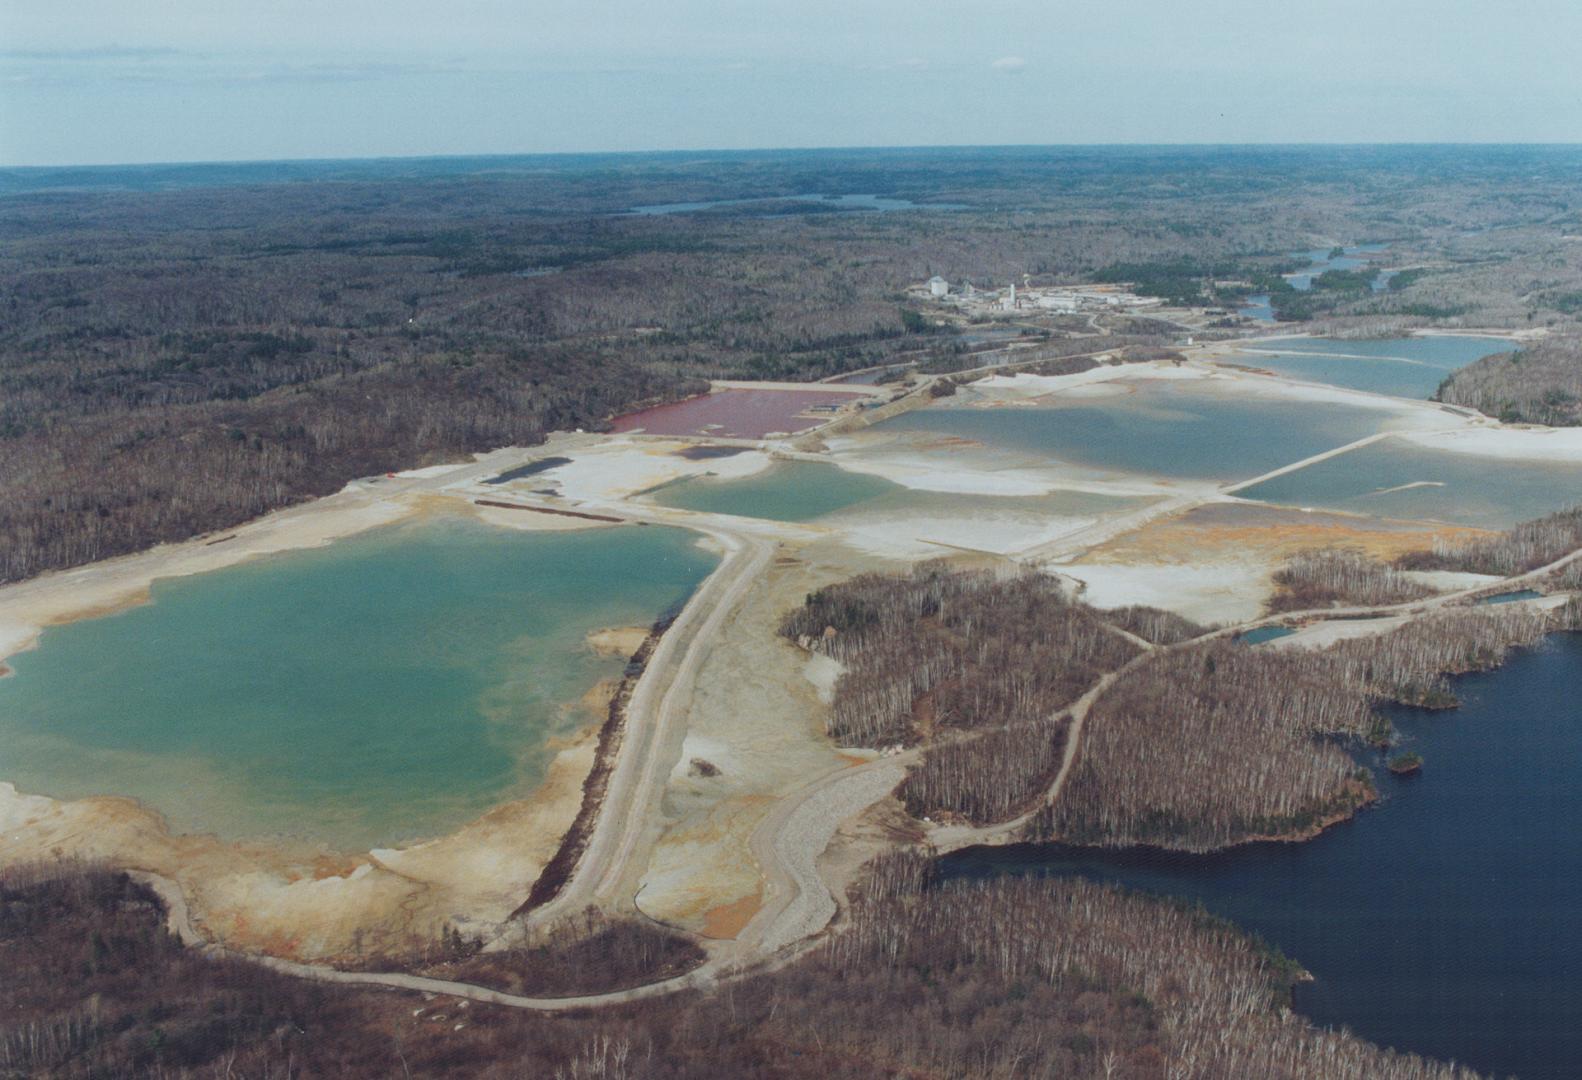 Denison Mines and Tailings